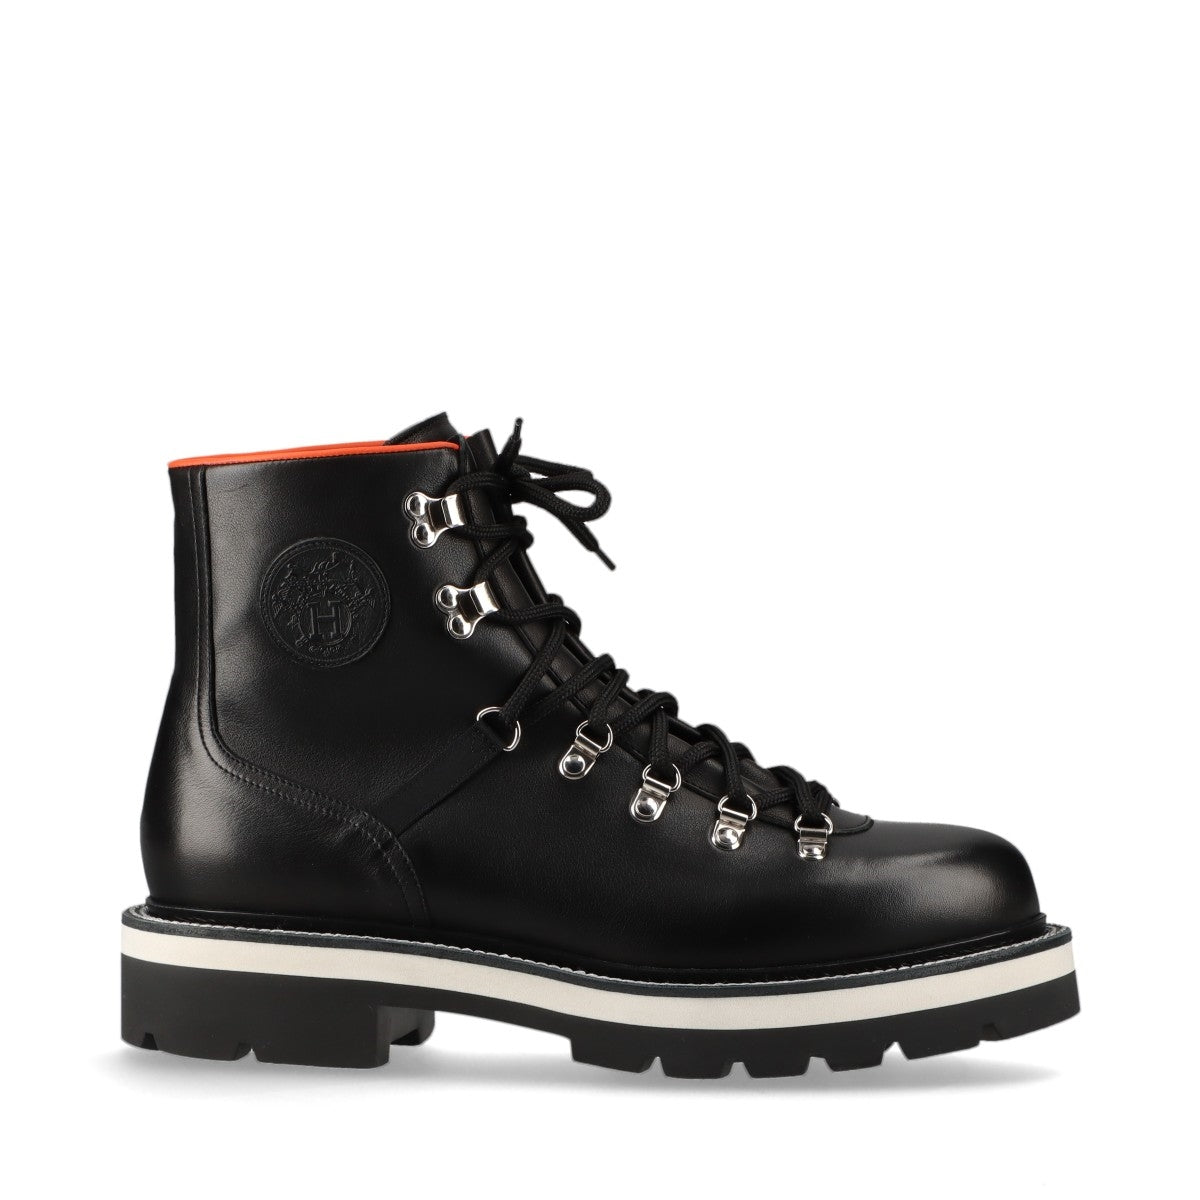 Hermès Leather Short Boots EU42 1/2 Men's Black HYKE Replacement string Box There is a bag